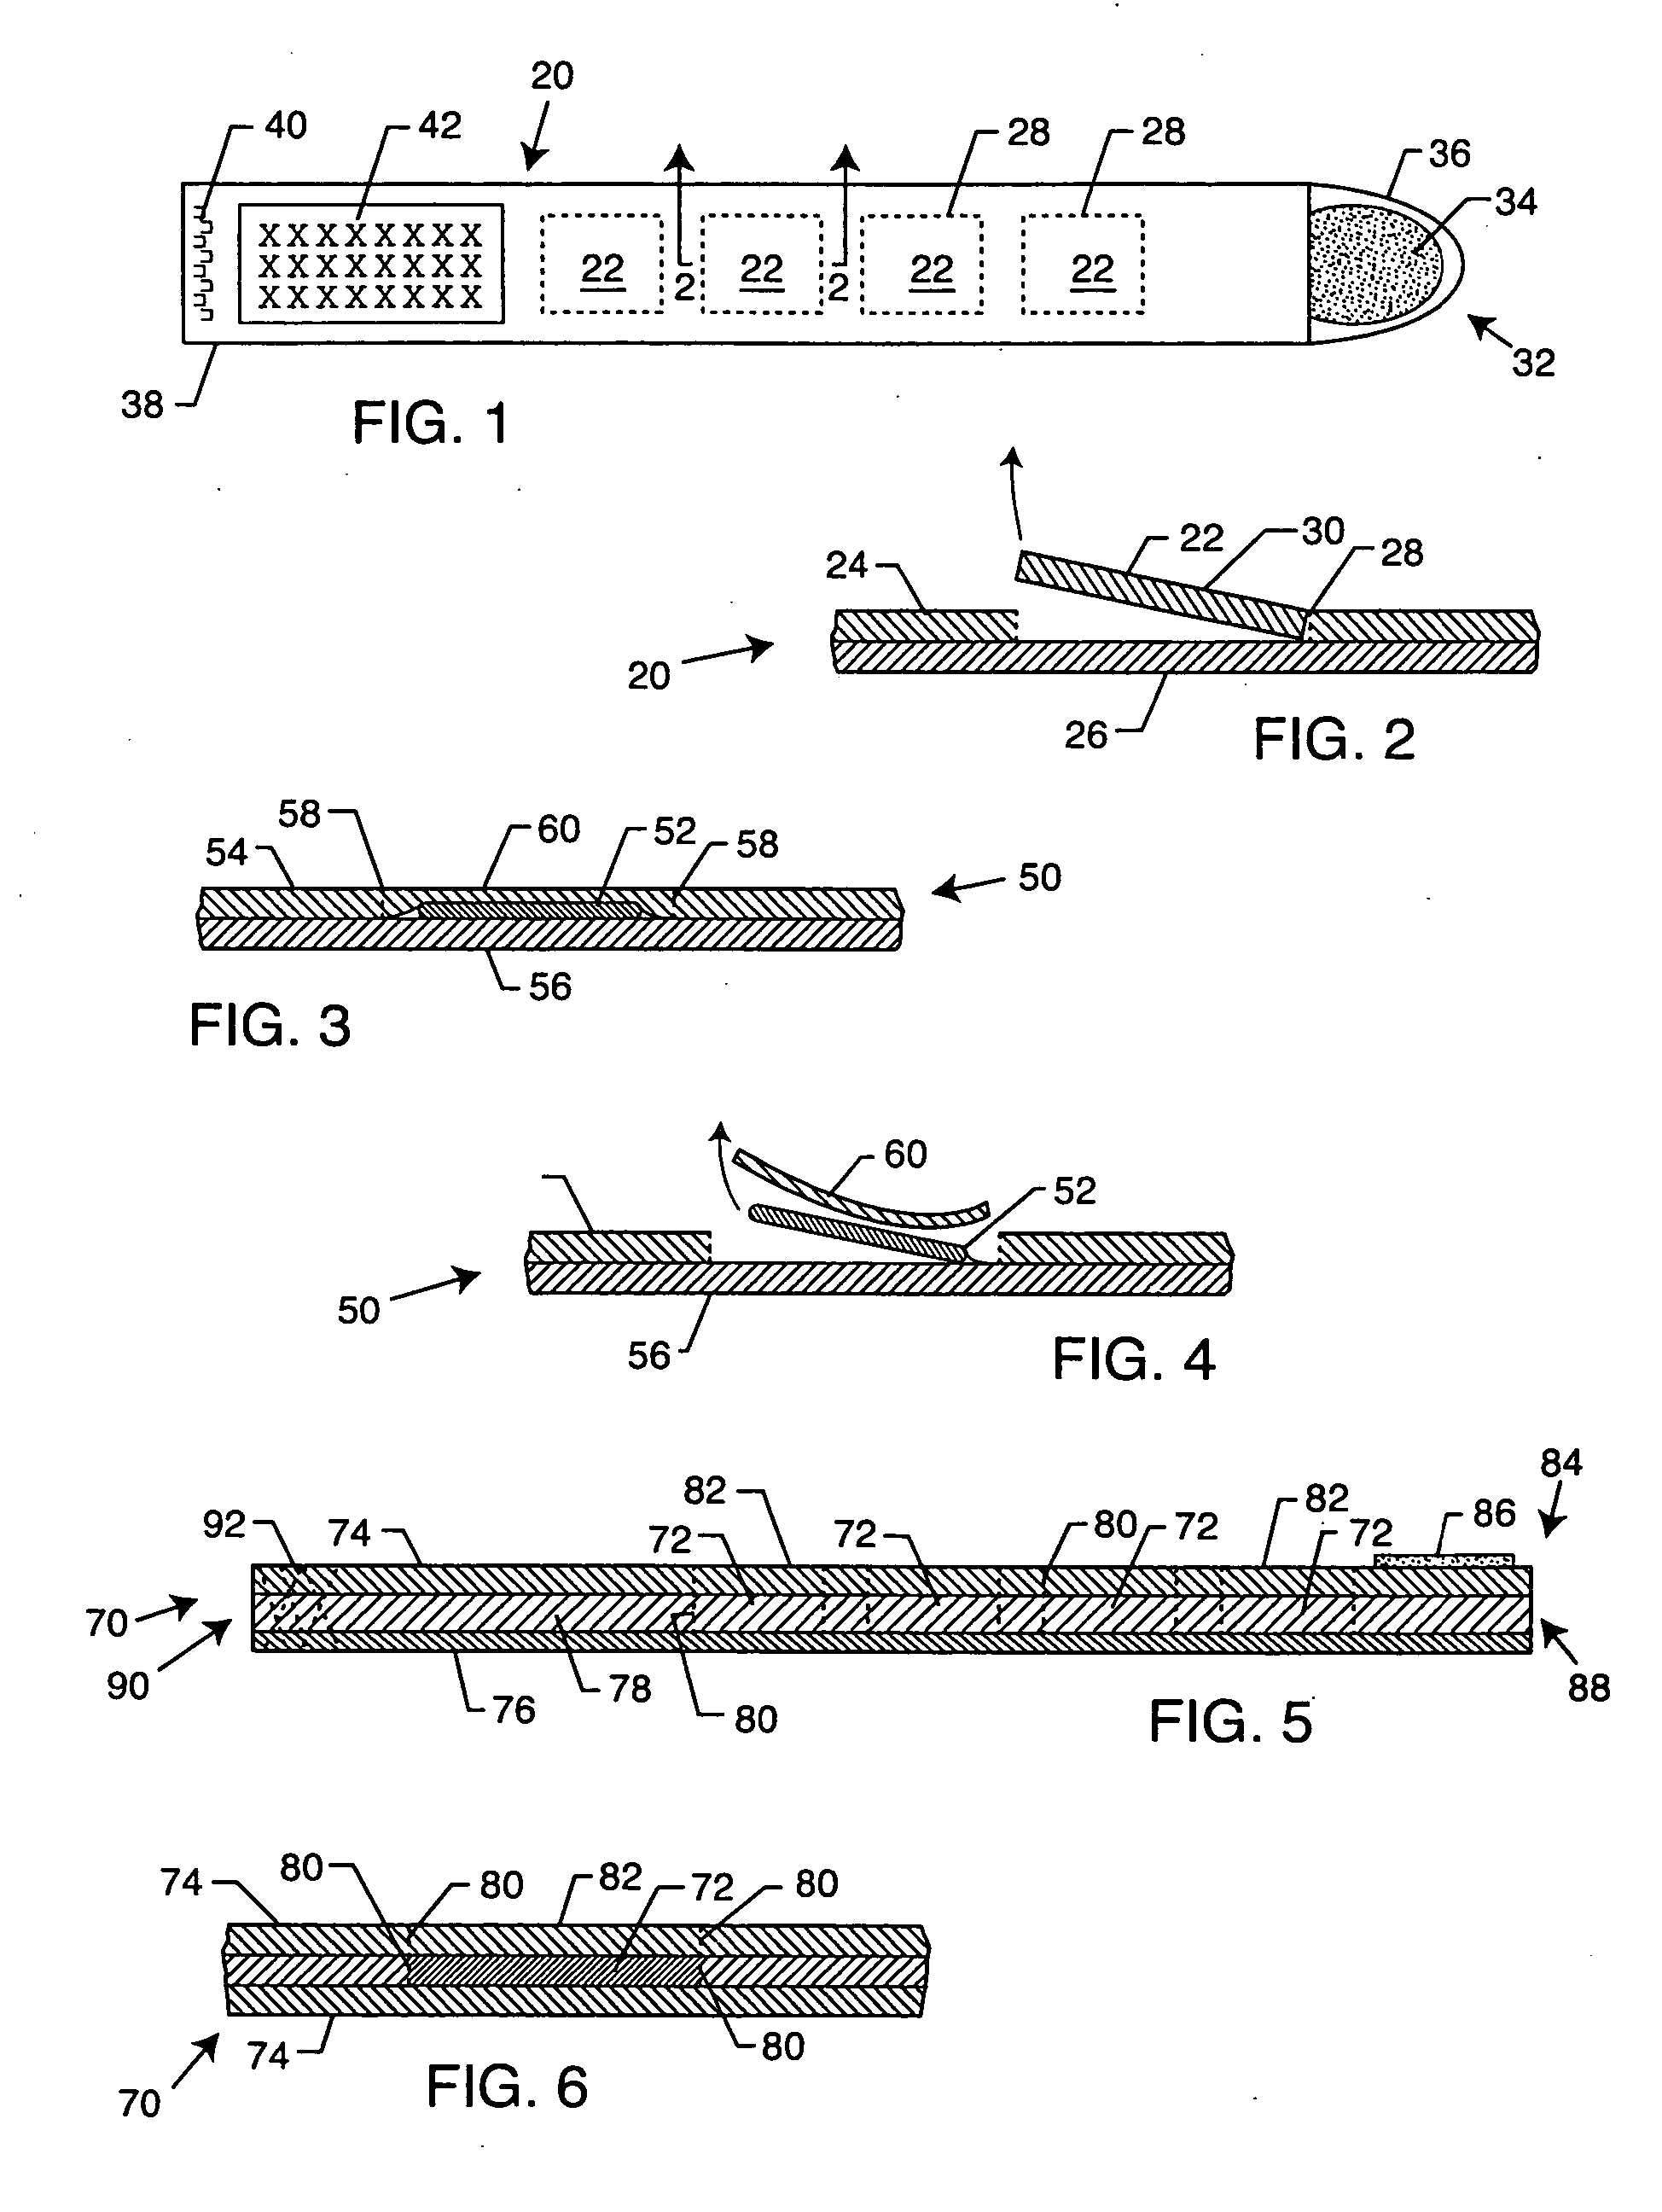 Method for effecting ticket-based transactions using a wristband